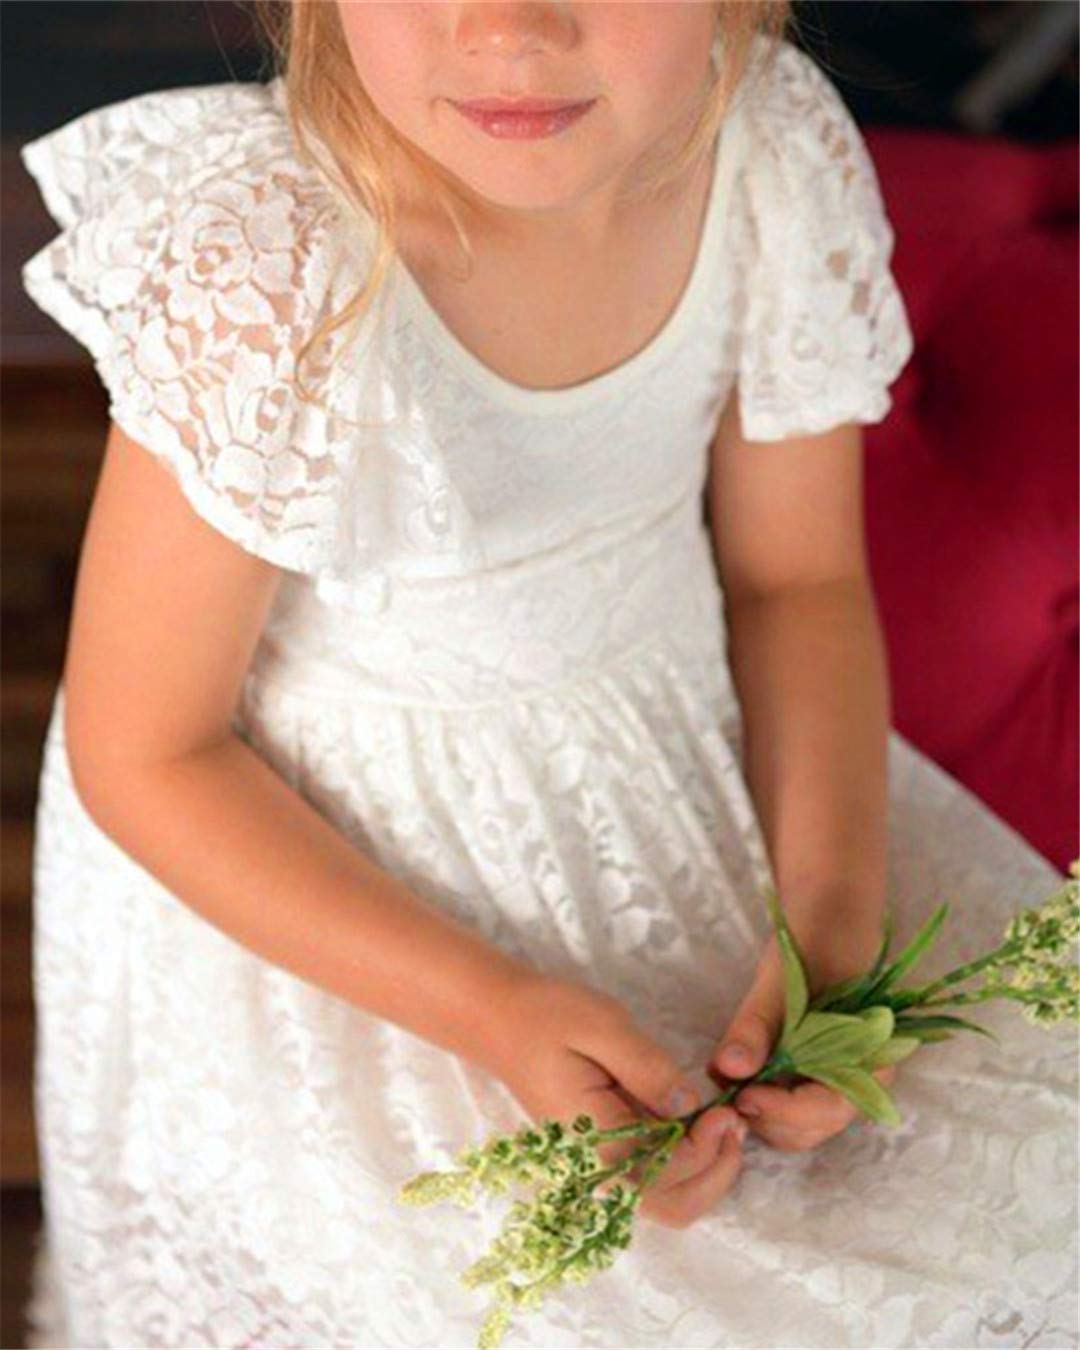 2Bunnies Flower Girl Dress Paisley All Lace Butterfly Sleeve Maxi (White) - 2BUNNIES